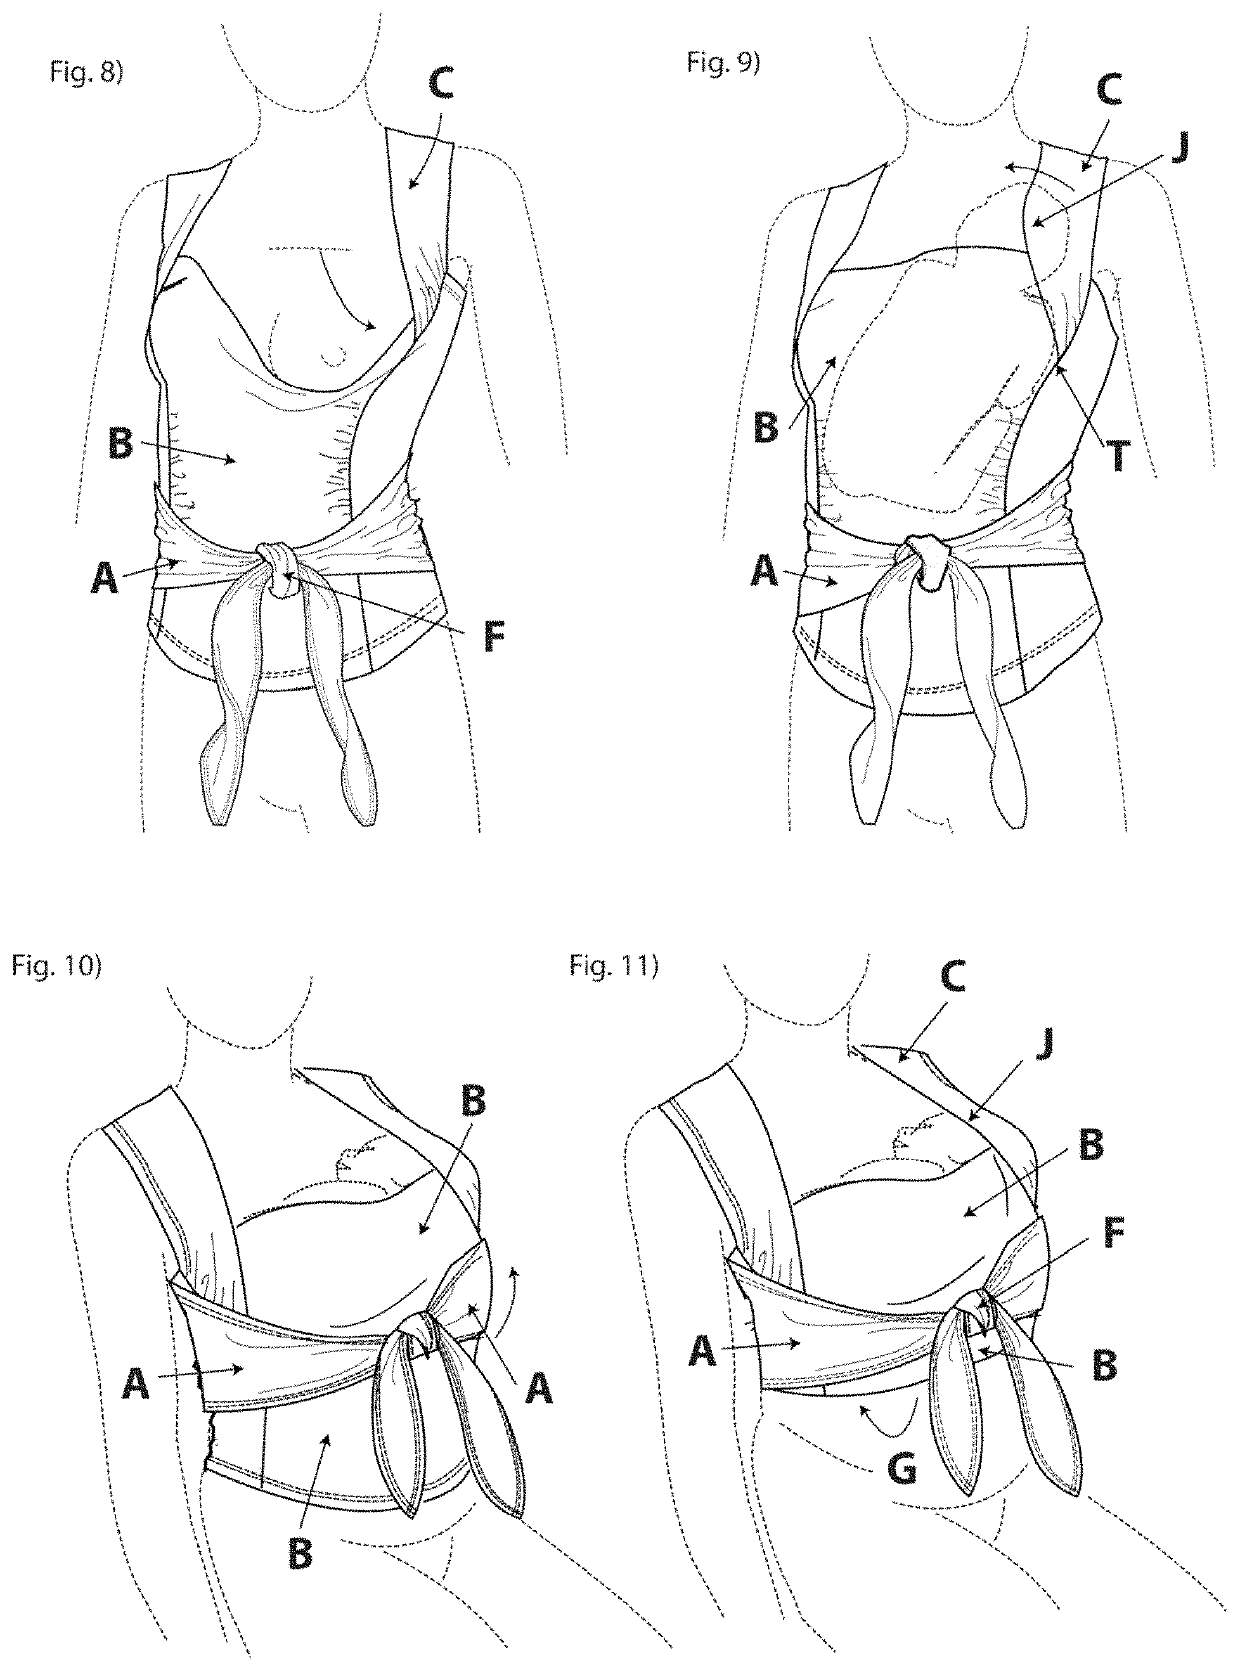 Undergarment for carrying a baby skin-to-skin